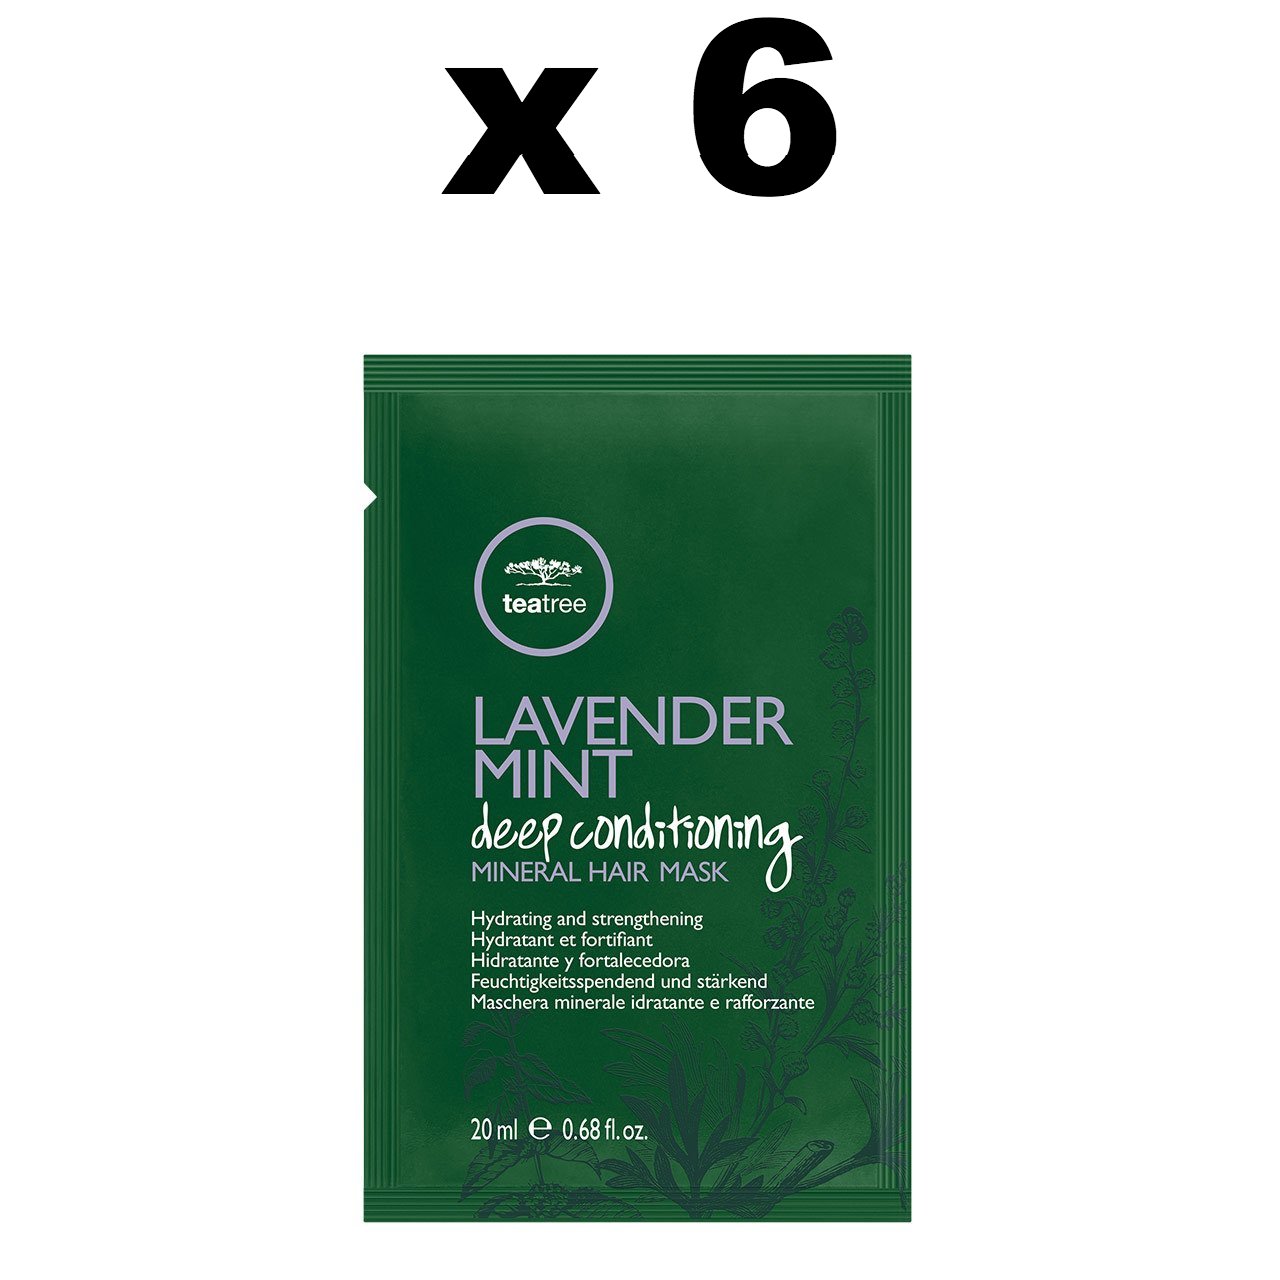 TEA TREE - Lavender Mint Deep Conditioning Mineral Hair Mask - Hypnotic Store